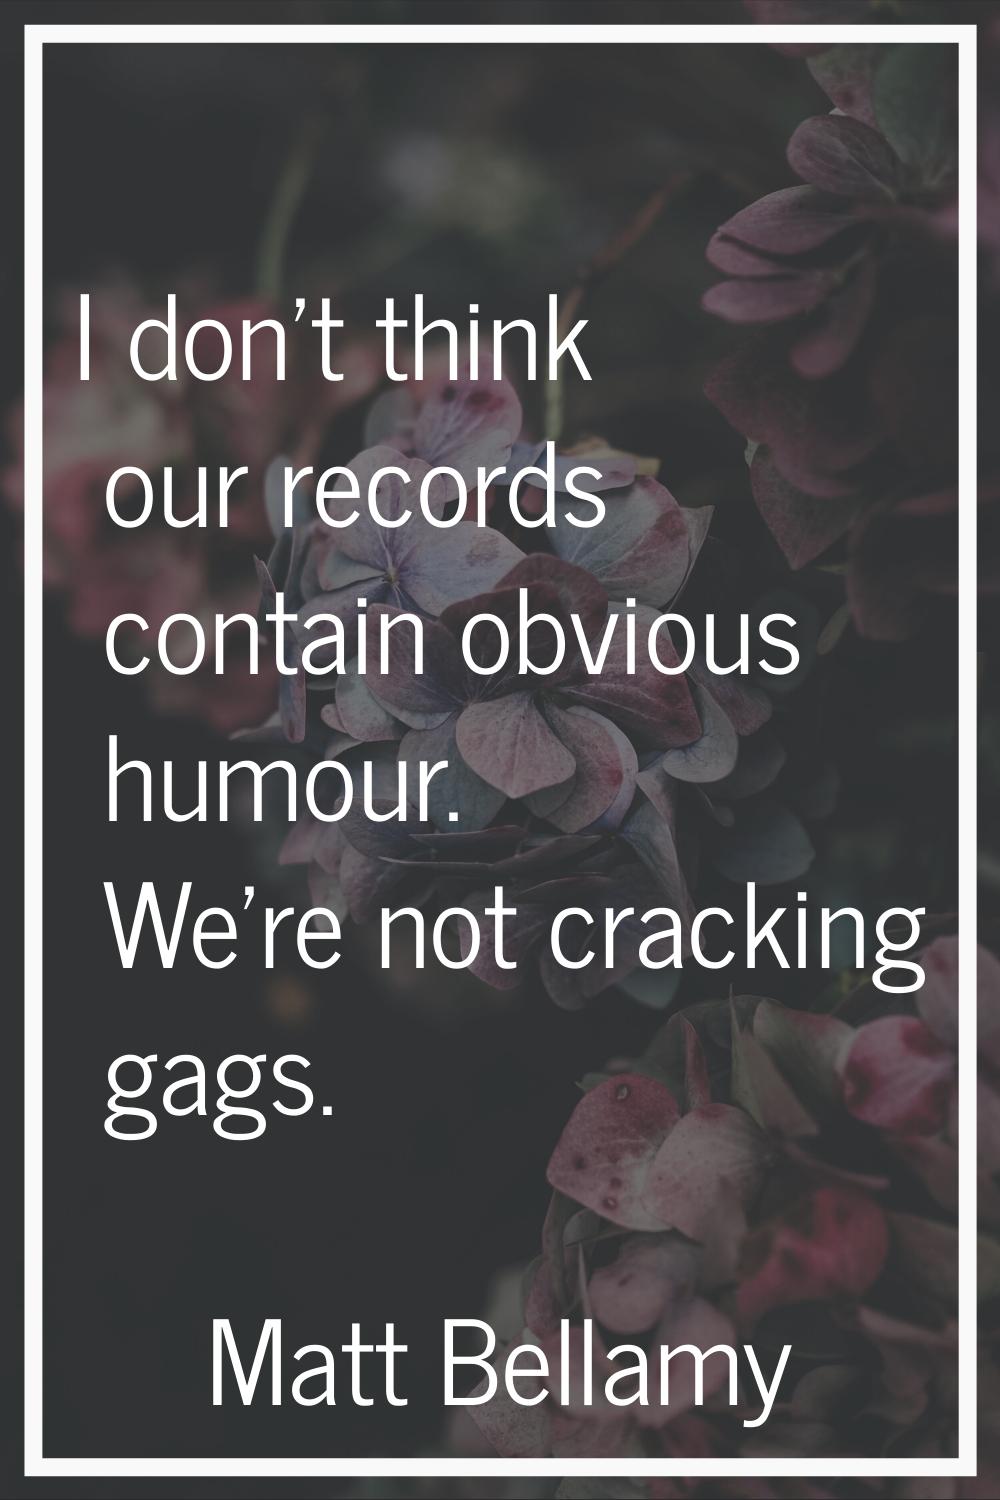 I don't think our records contain obvious humour. We're not cracking gags.